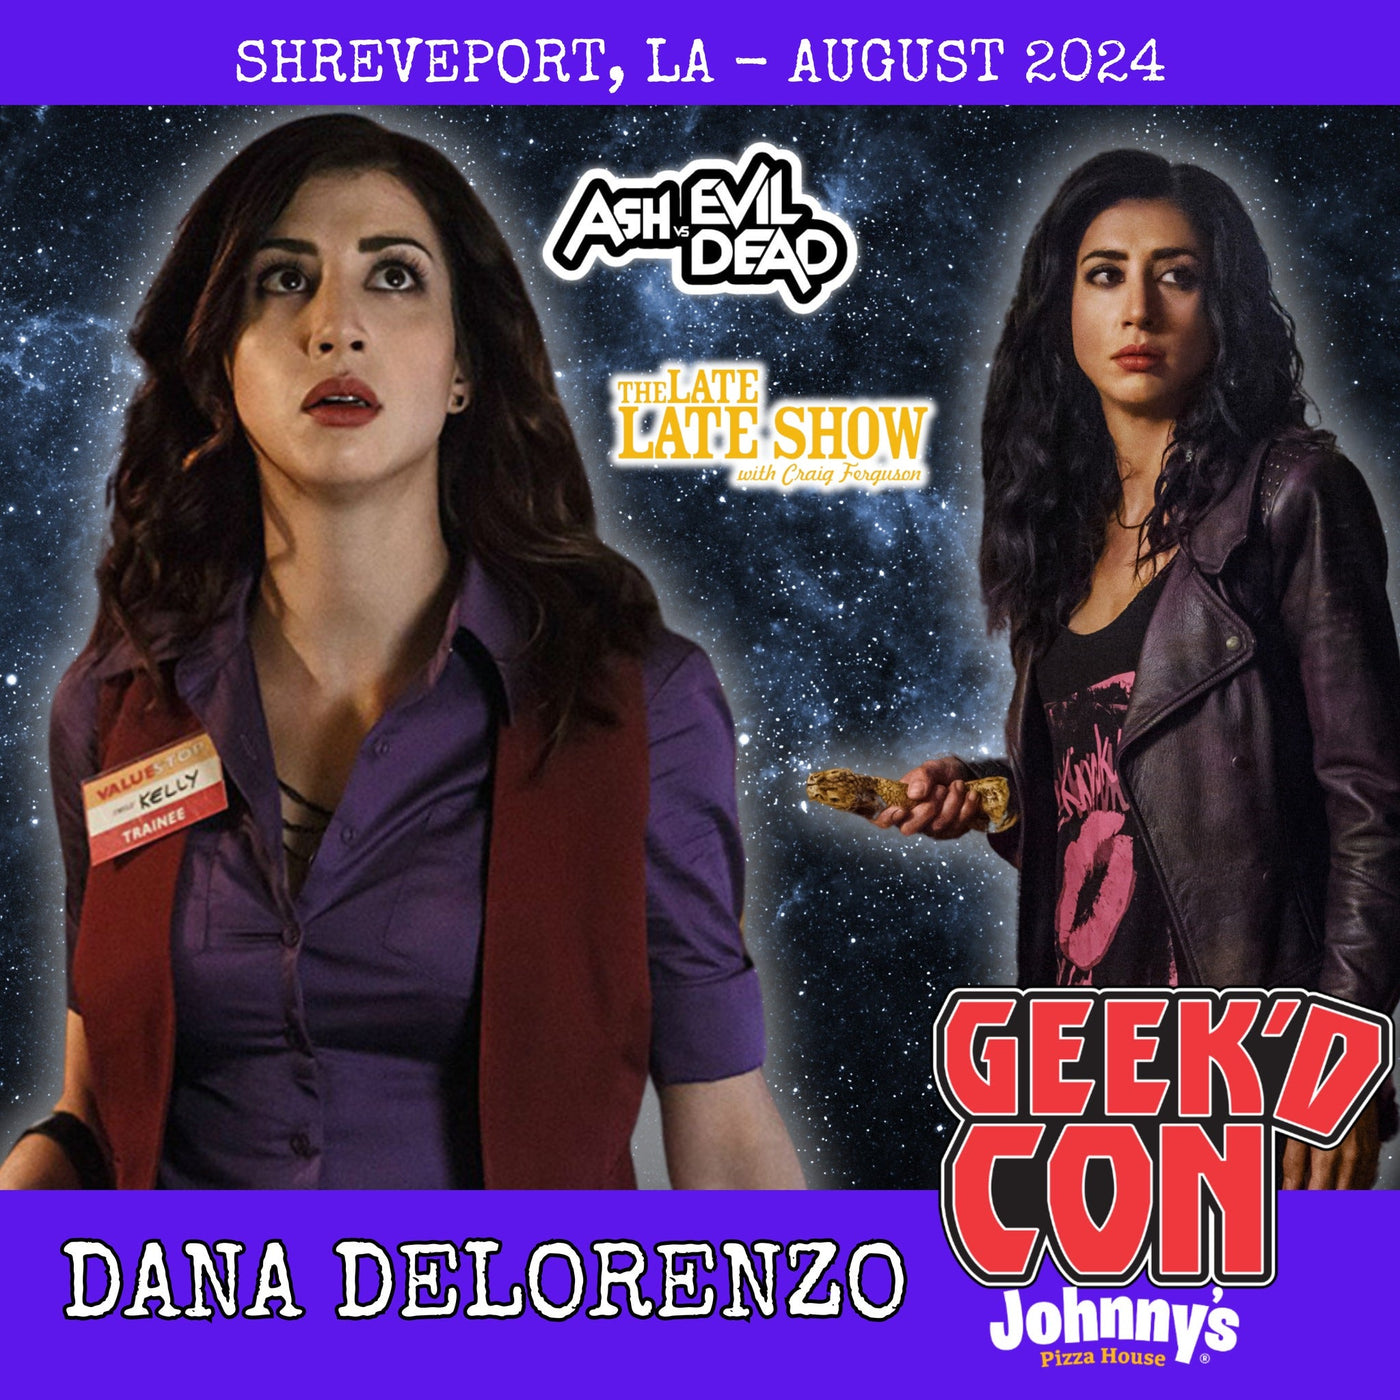 Dana DeLorenzo Official Autograph Mail-In Service - Geek'd Con 2024